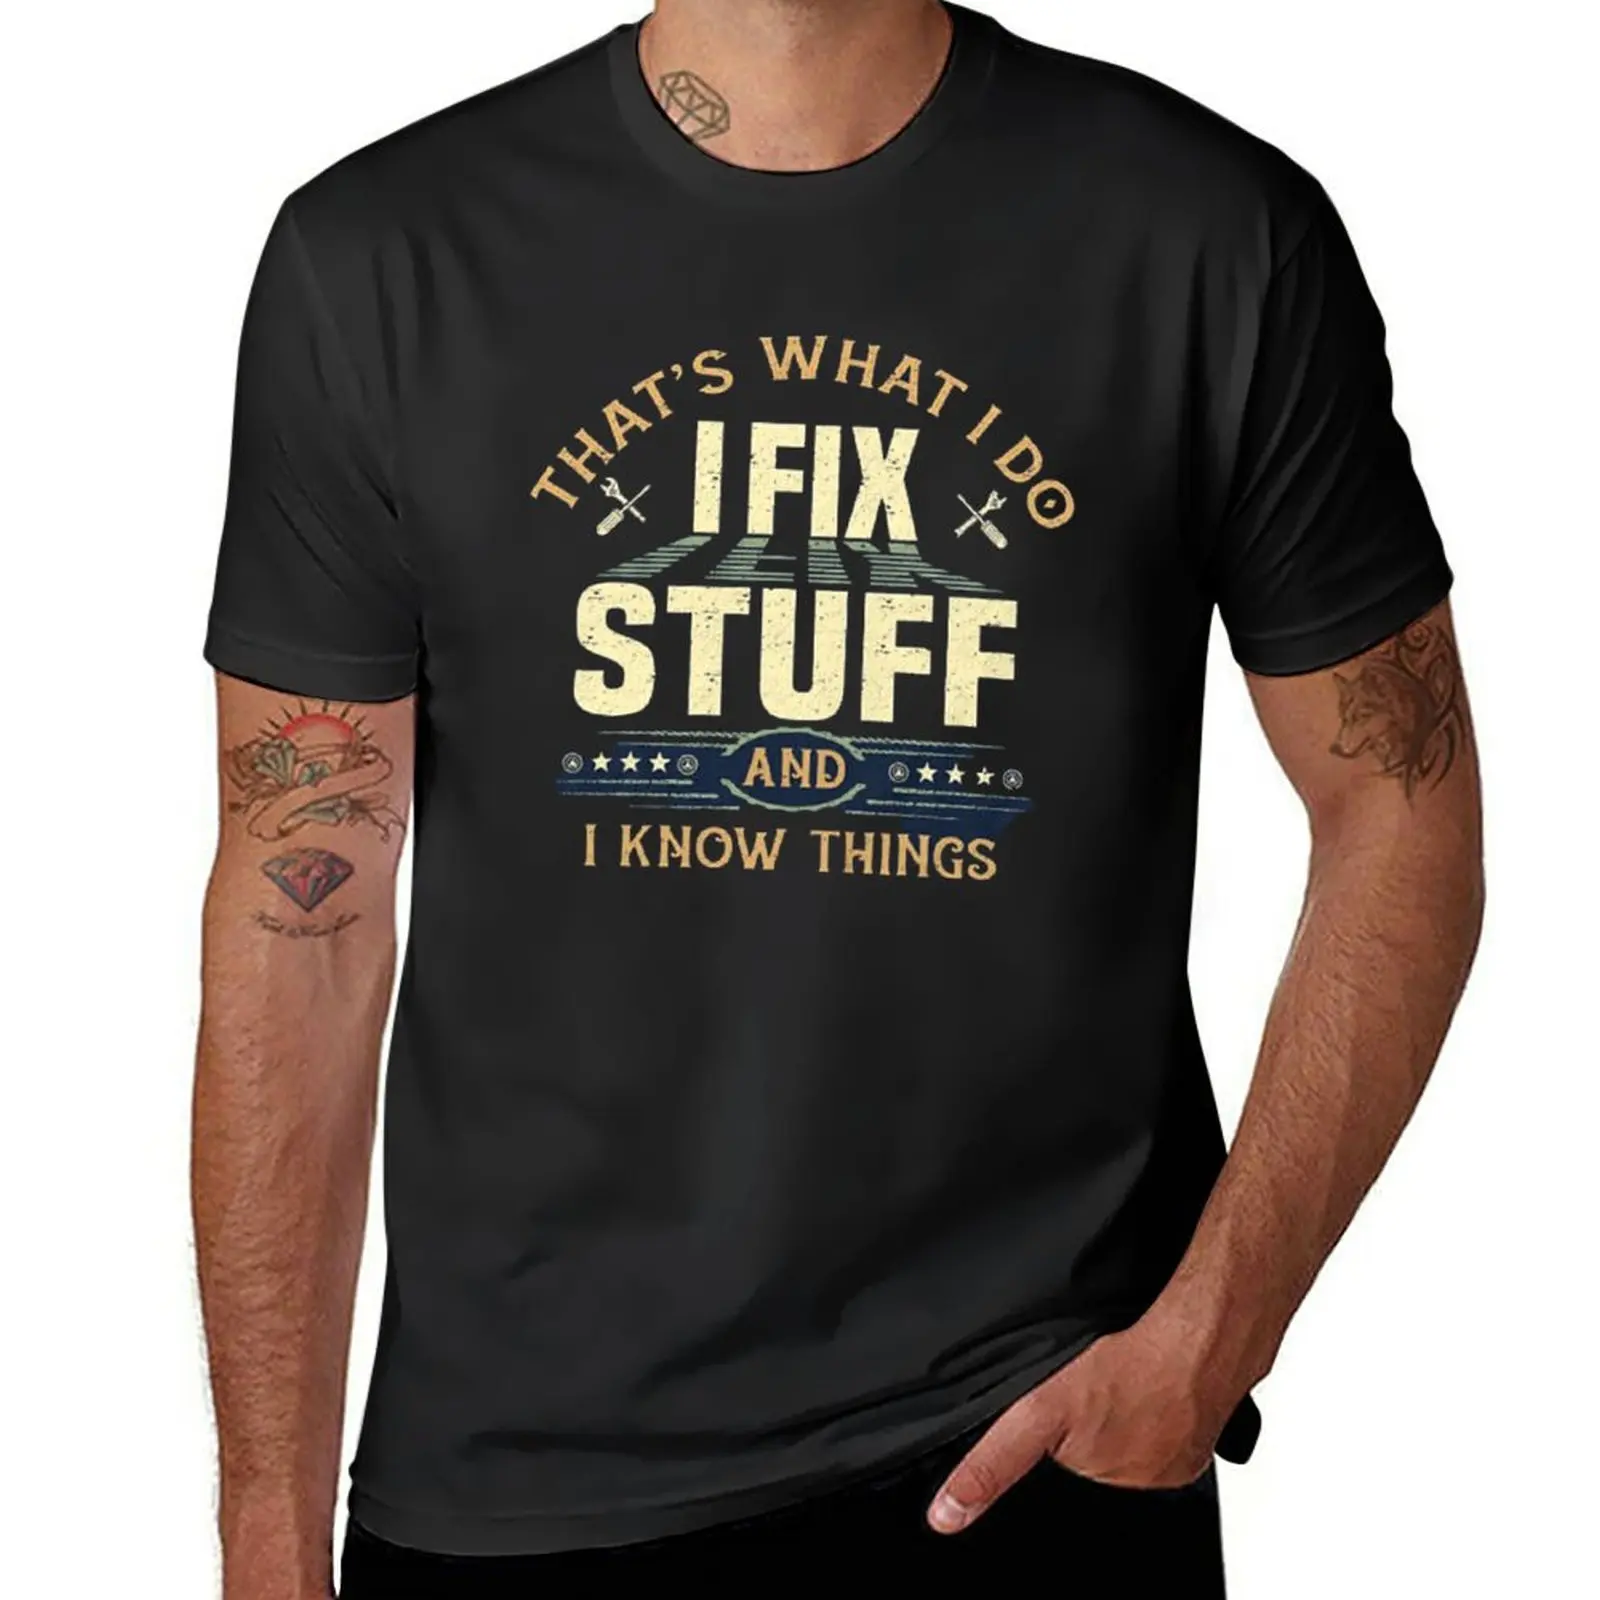 

New THAT'S WHAT I DO - I FIX STUFF AND I KNOW THINGS T-Shirt vintage clothes plain t-shirt custom t shirts mens workout shirts